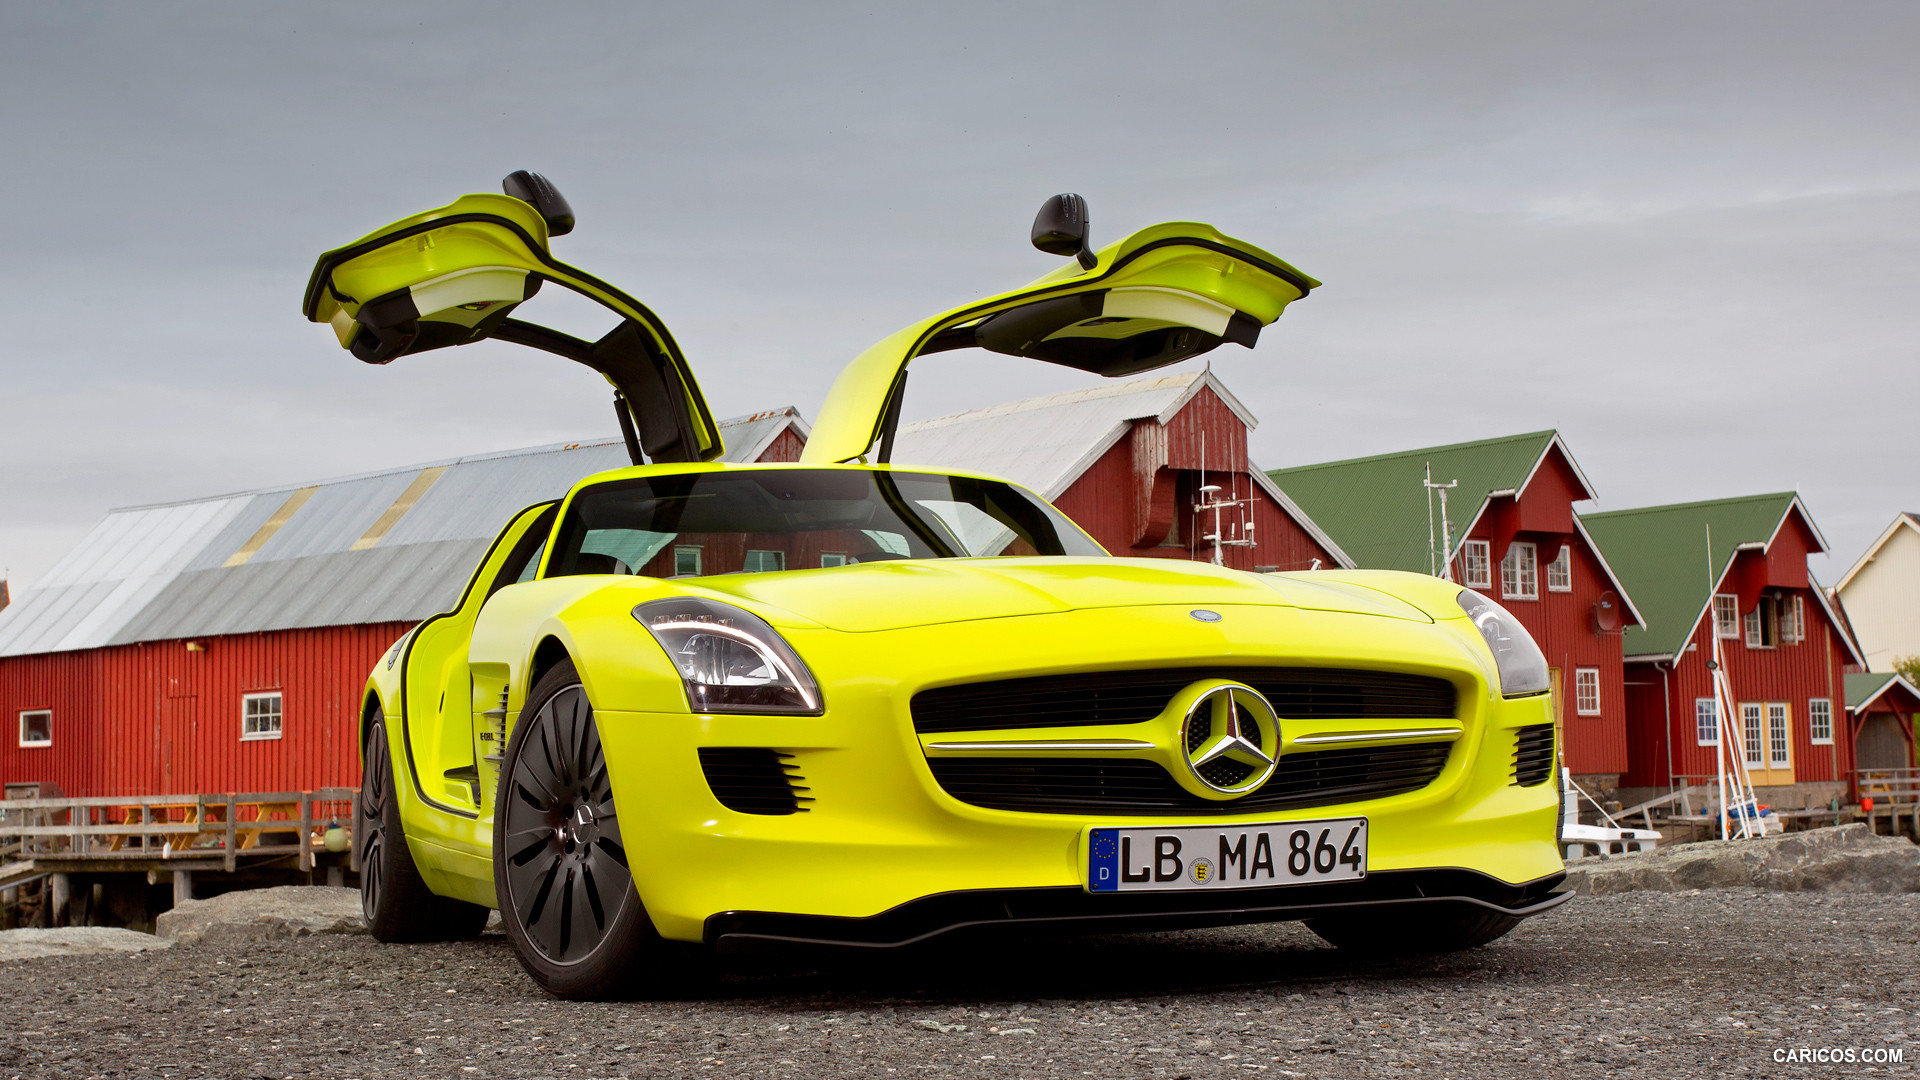 Mercedes-Benz SLS AMG E-CELL Concept  - Front, #1 of 60